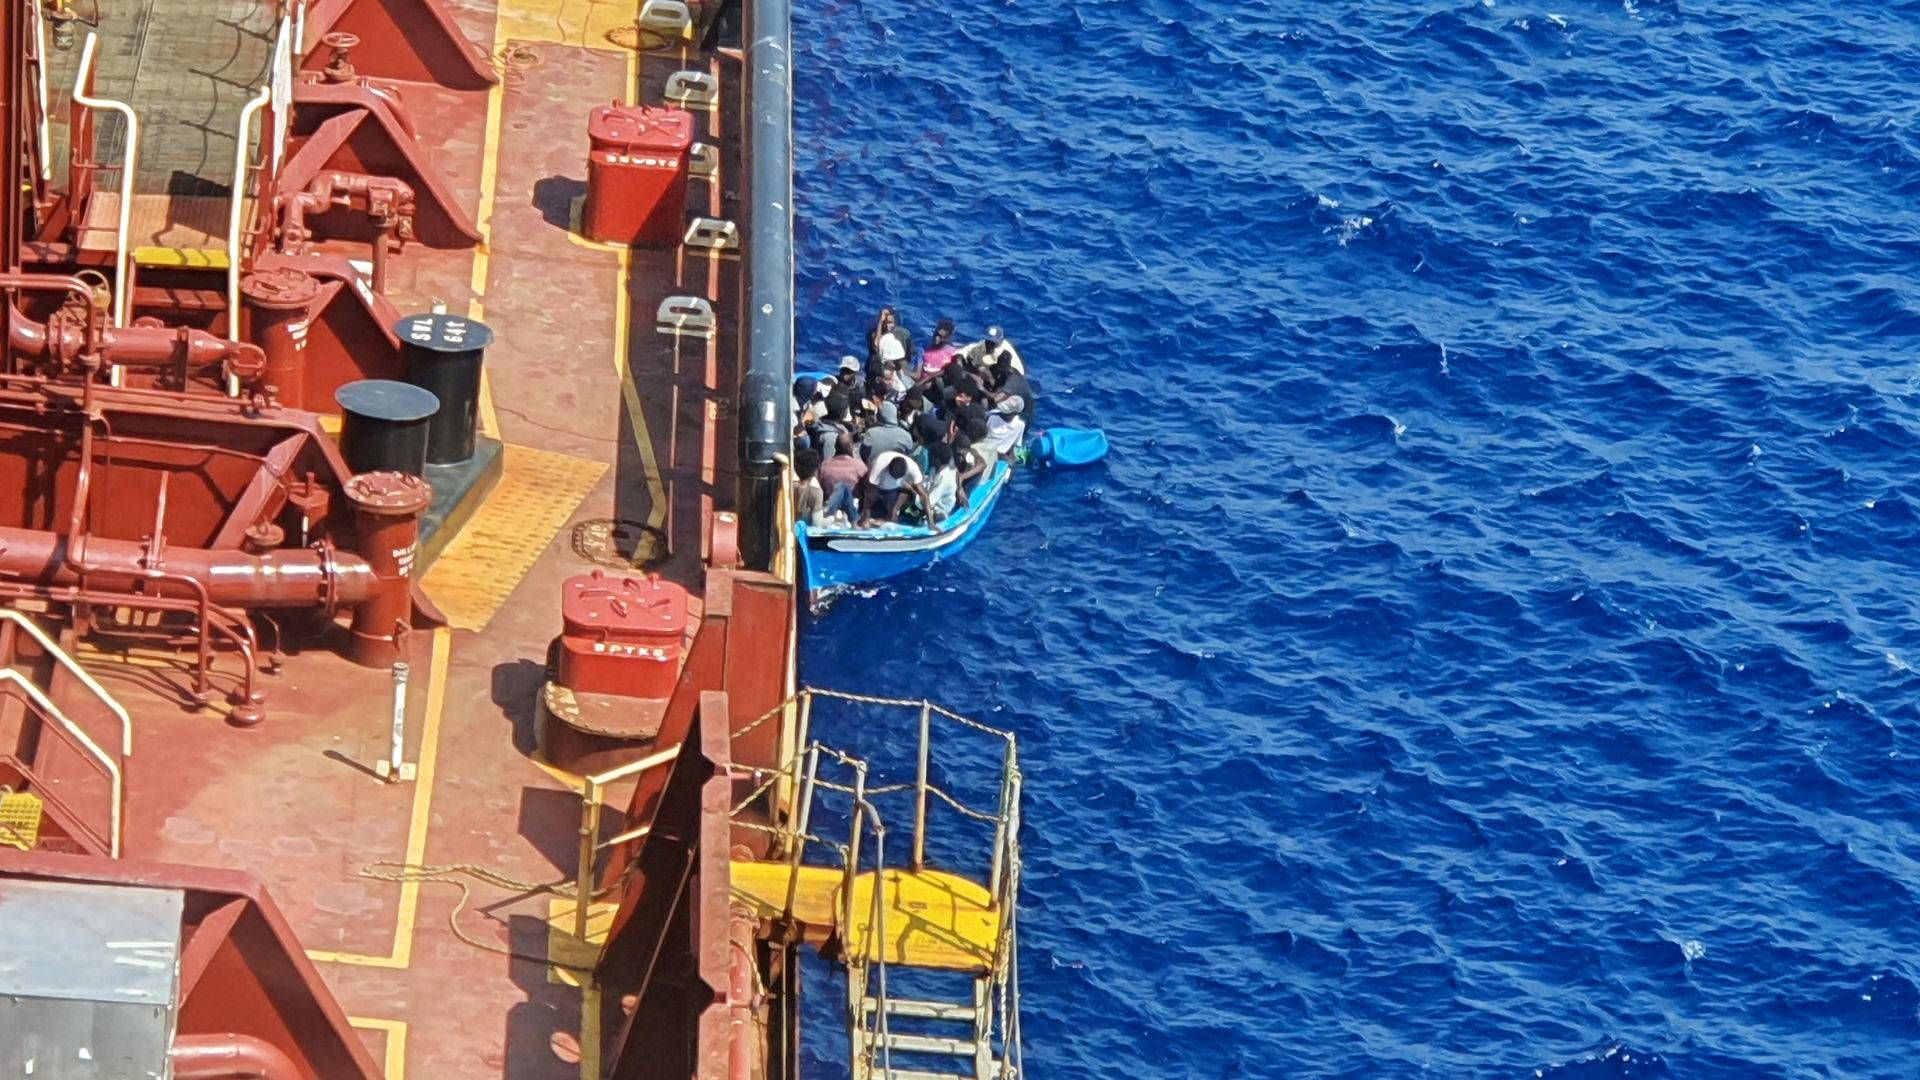 The episode on board vessel Maersk Etienne in 2020 has led IMO countries to meet and confirm the rules on rescues. | Photo: Handout/Reuters/Ritzau Scanpix